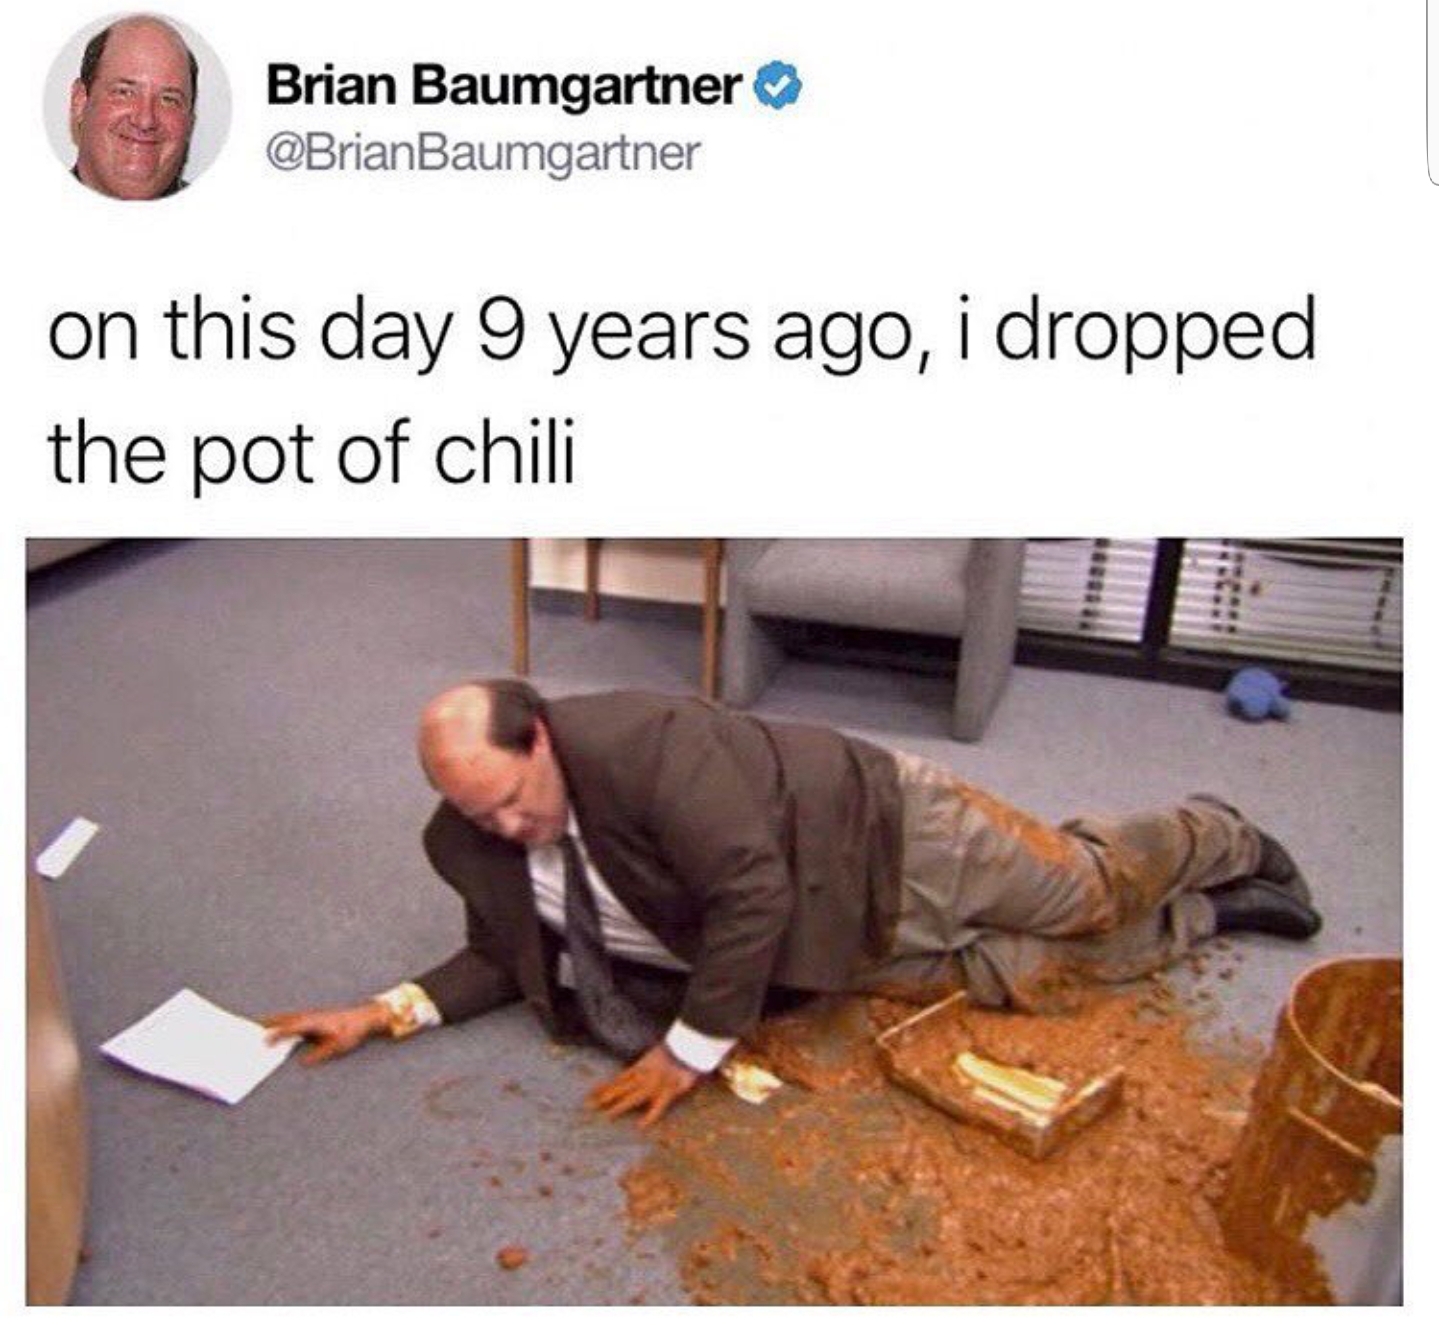 kevin the office chili - Brian Baumgartner on this day 9 years ago, i dropped the pot of chili